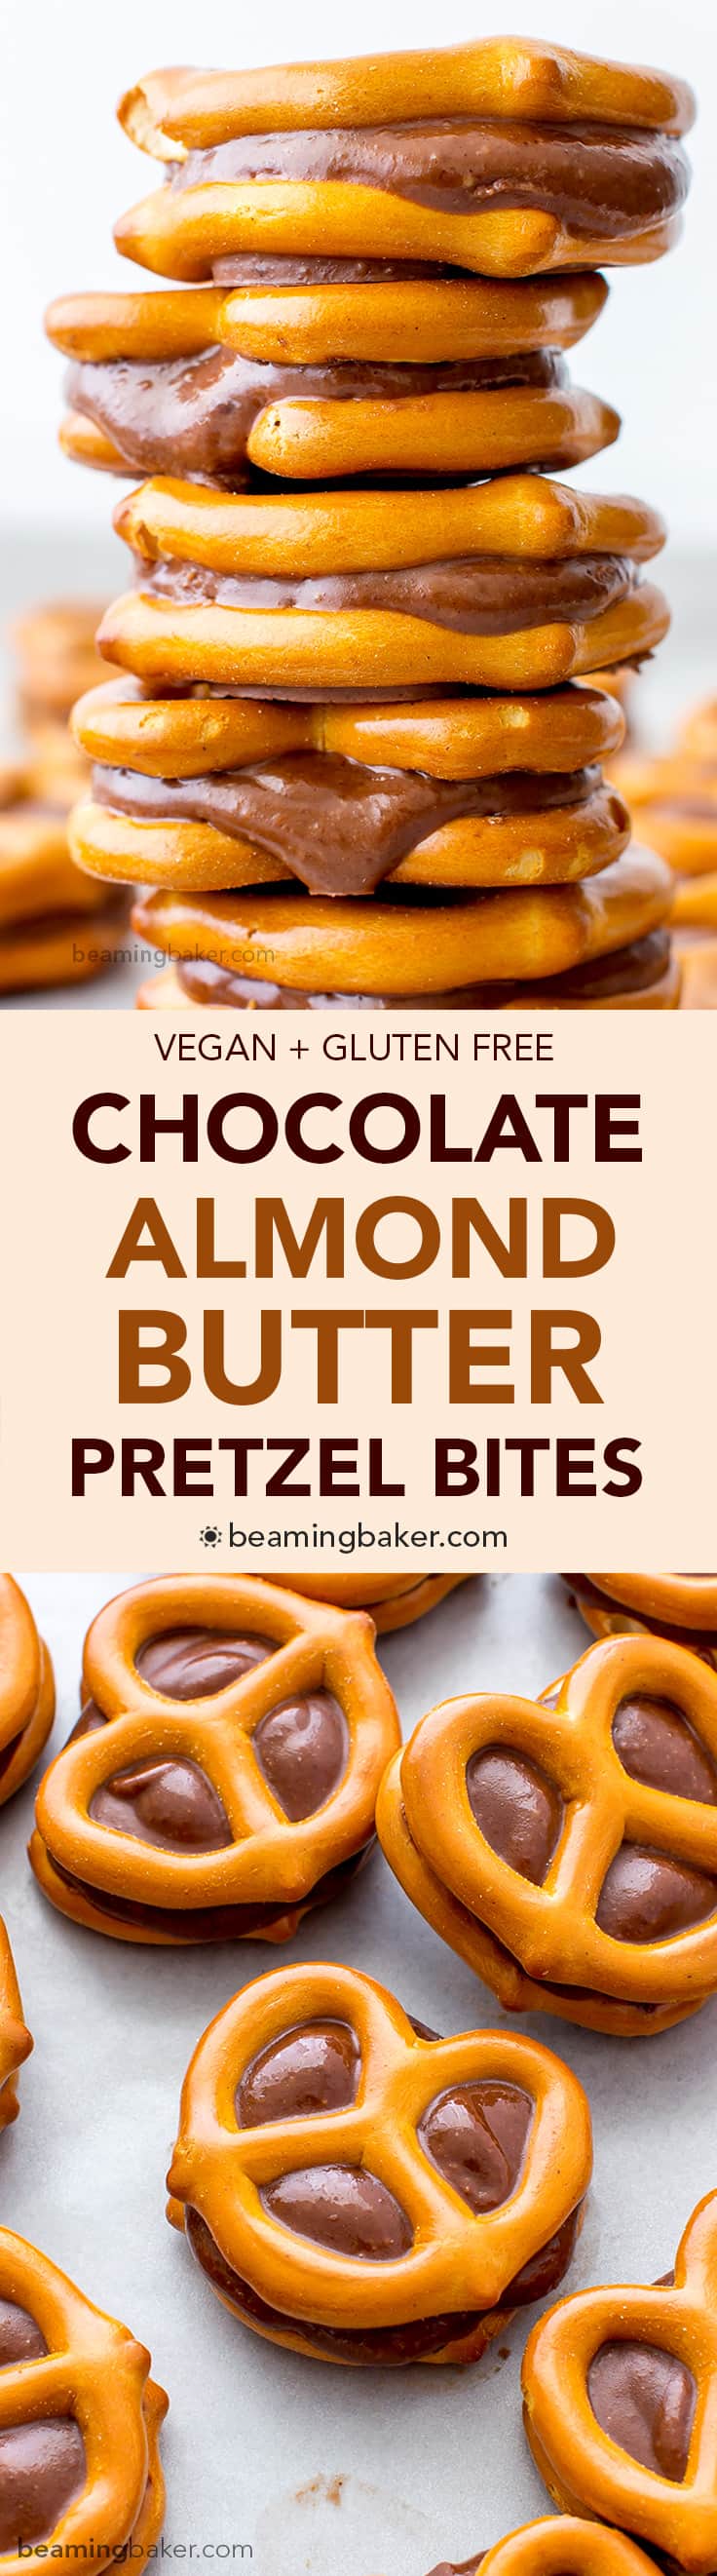 Chocolate Almond Butter Pretzel Bites (V+GF): an easy 3 ingredient recipe for a sweet snack packed full of protein and chocolate flavor. #Vegan #GlutenFree | BeamingBaker.com